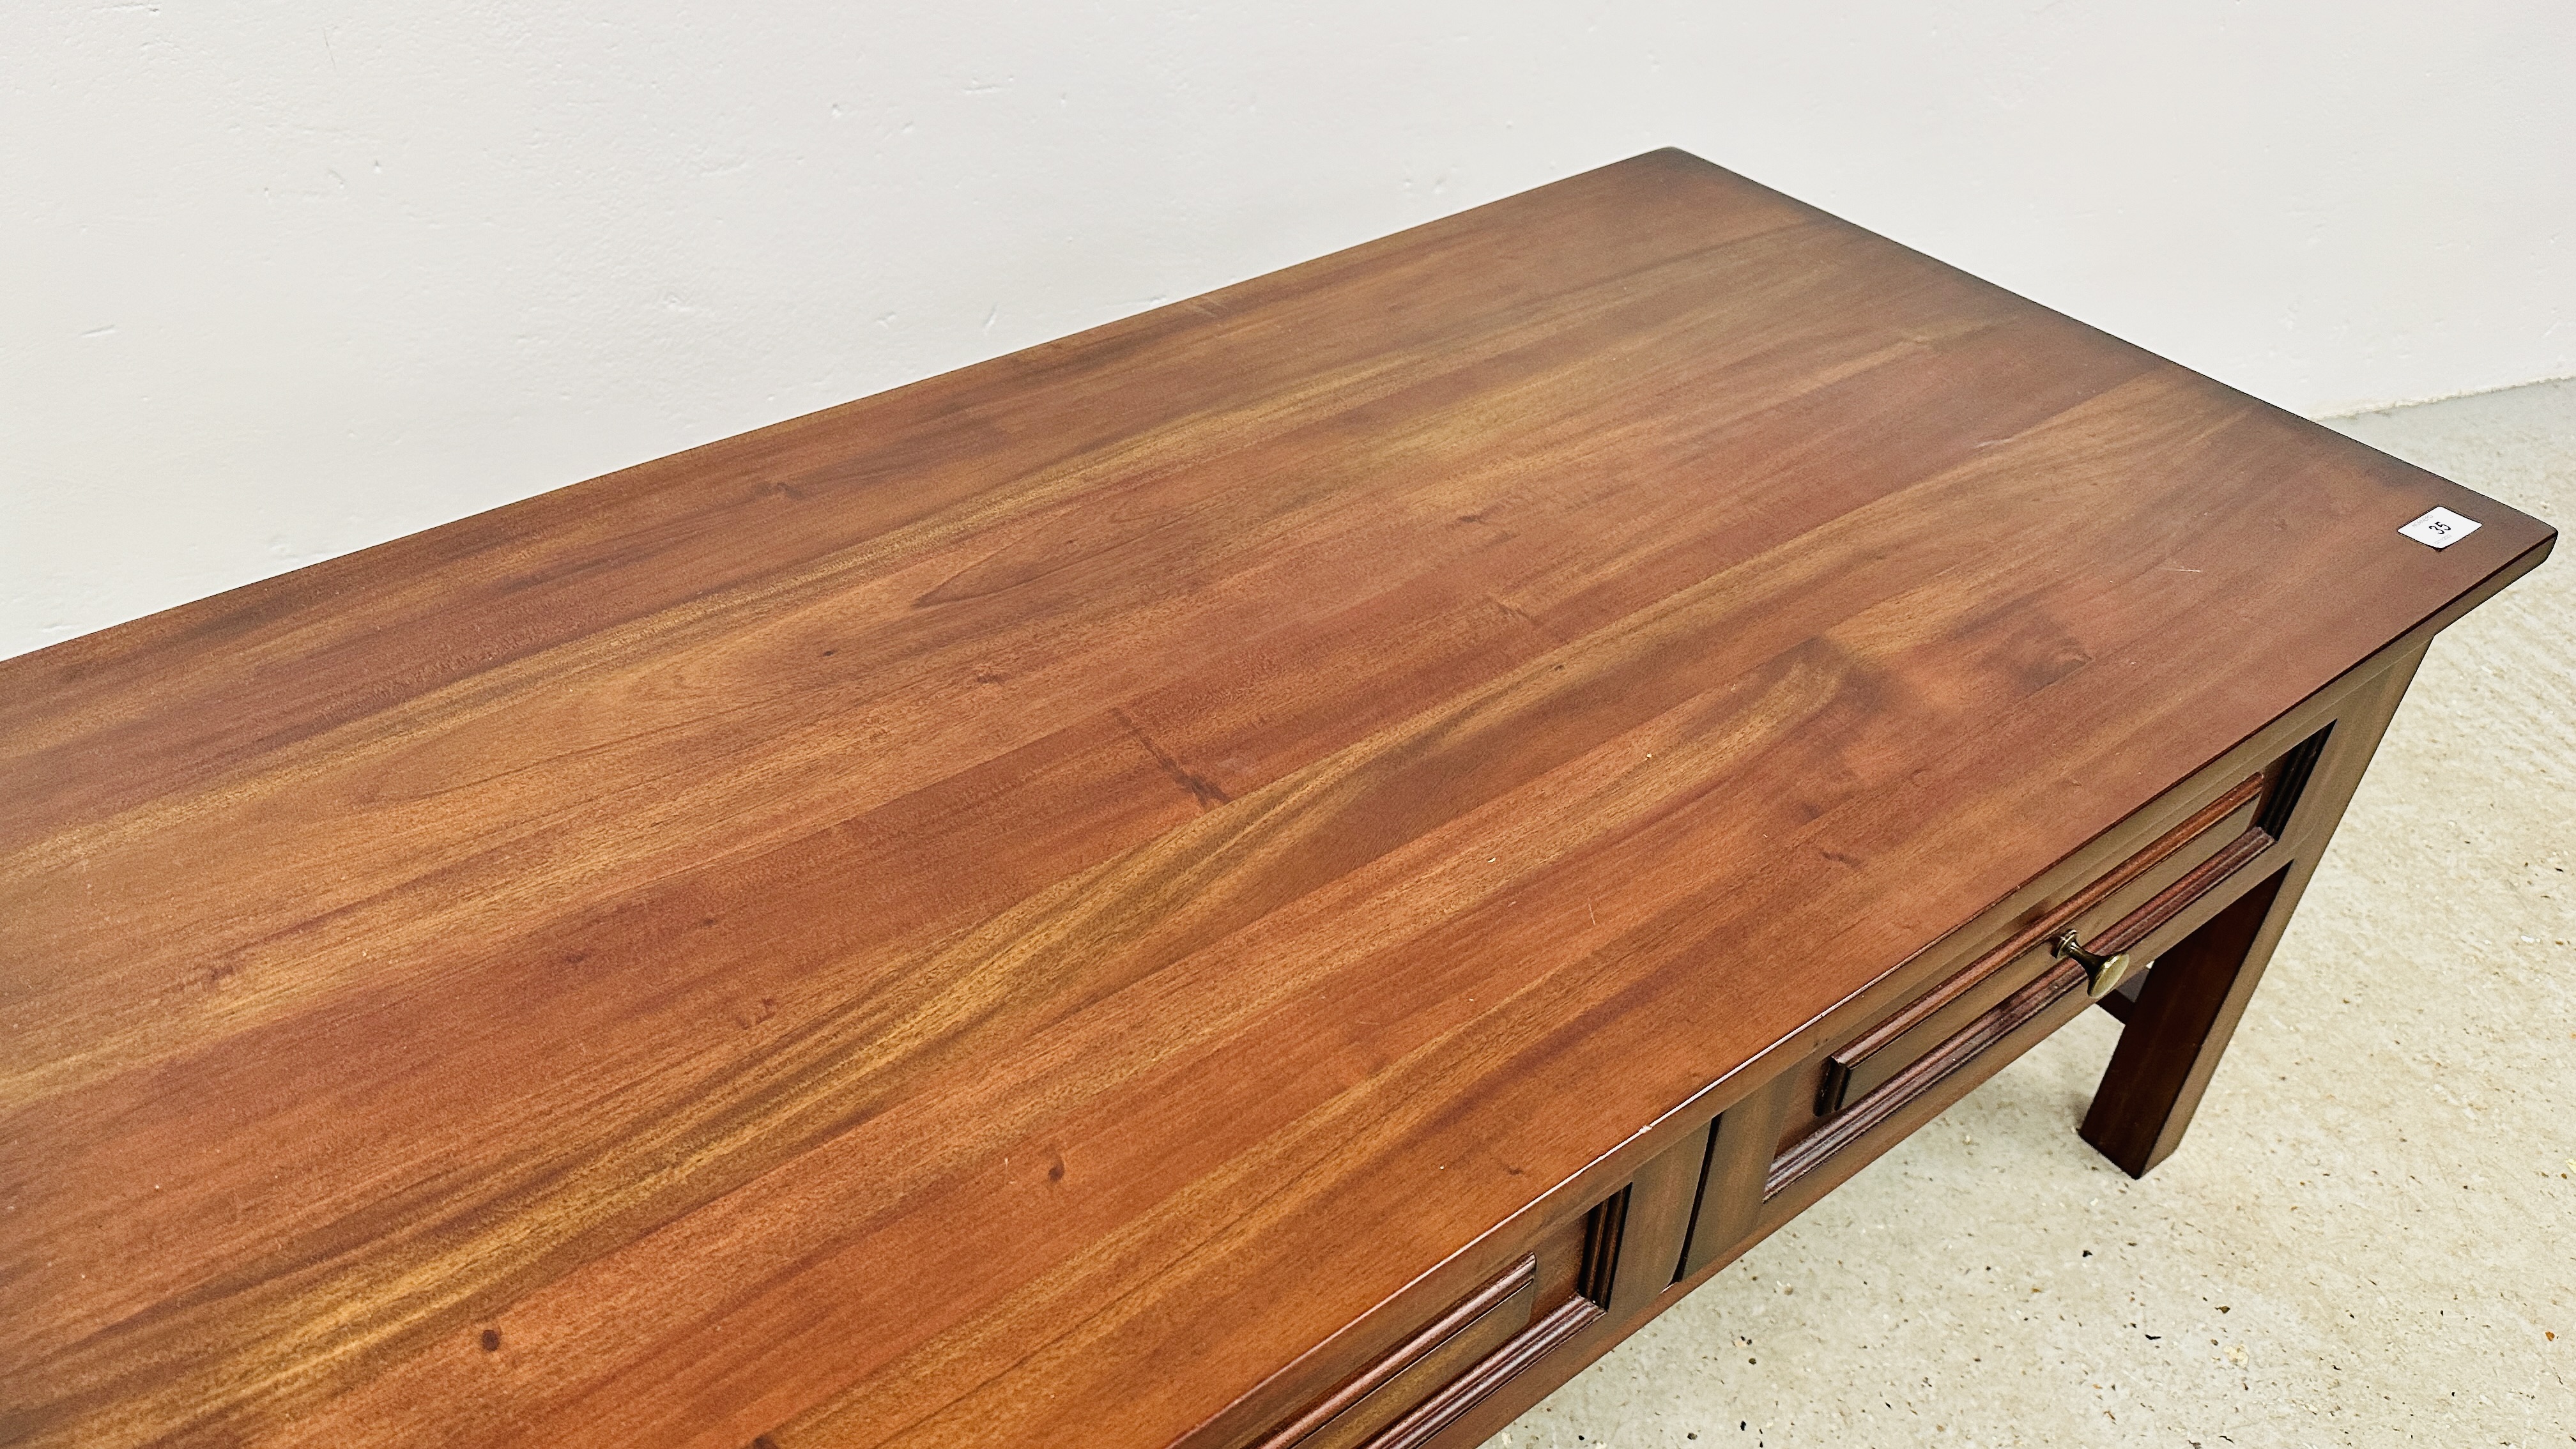 A DARK WOOD TWO DRAWER RECTANGULAR COFFEE TABLE - 110CM X 60CM. - Image 7 of 9